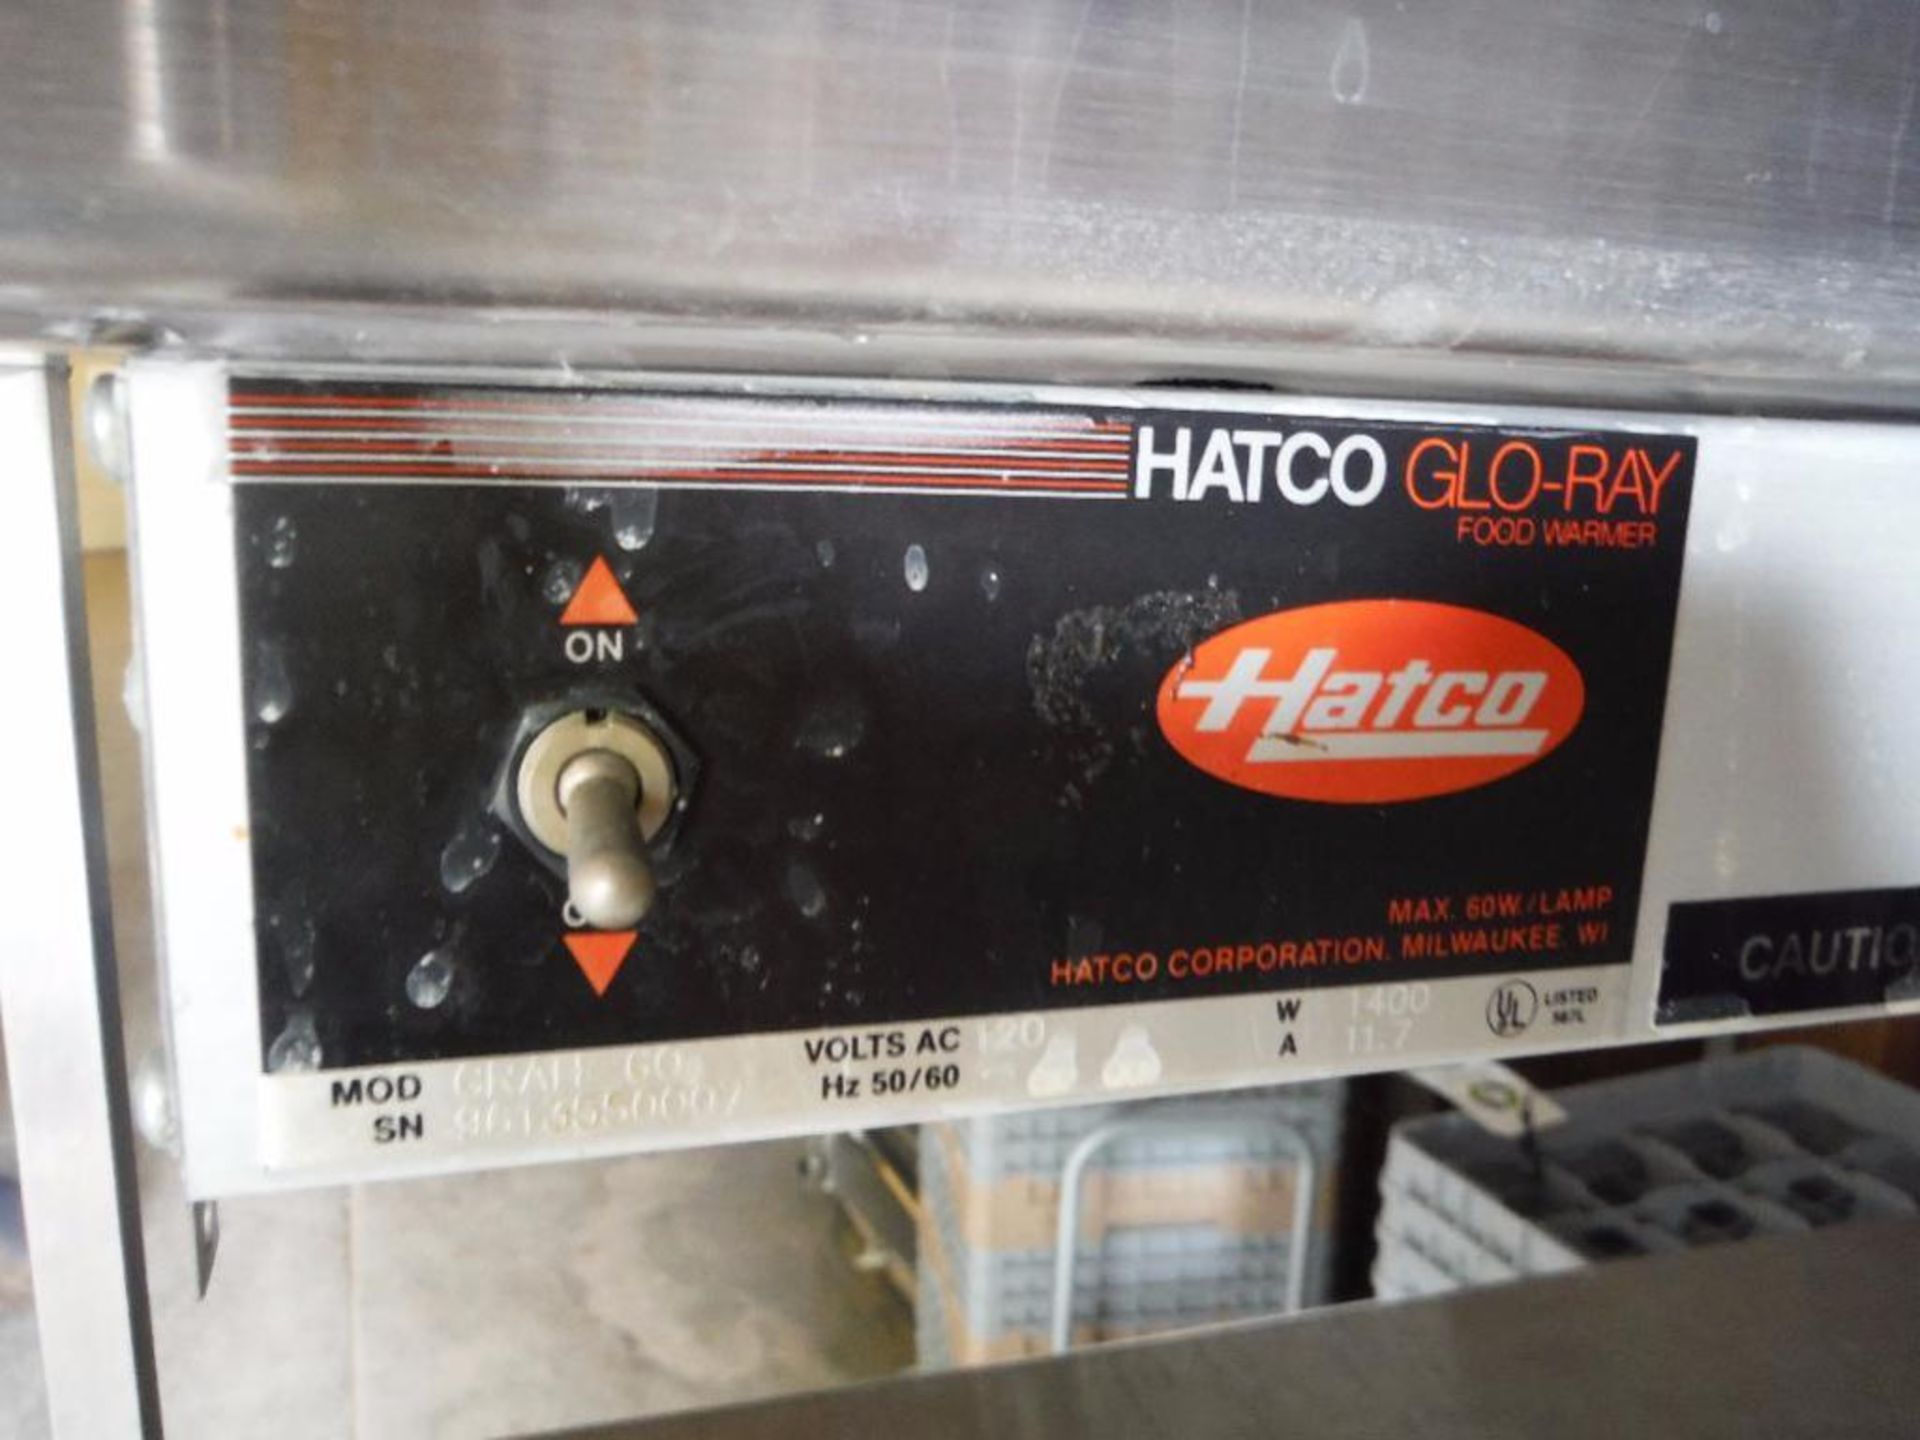 Hatco Glo-Ray food warmer, Model Grah-60, SN 961355008 ** Rigging Fee: $ 100** (Located in: Marshall - Image 3 of 5